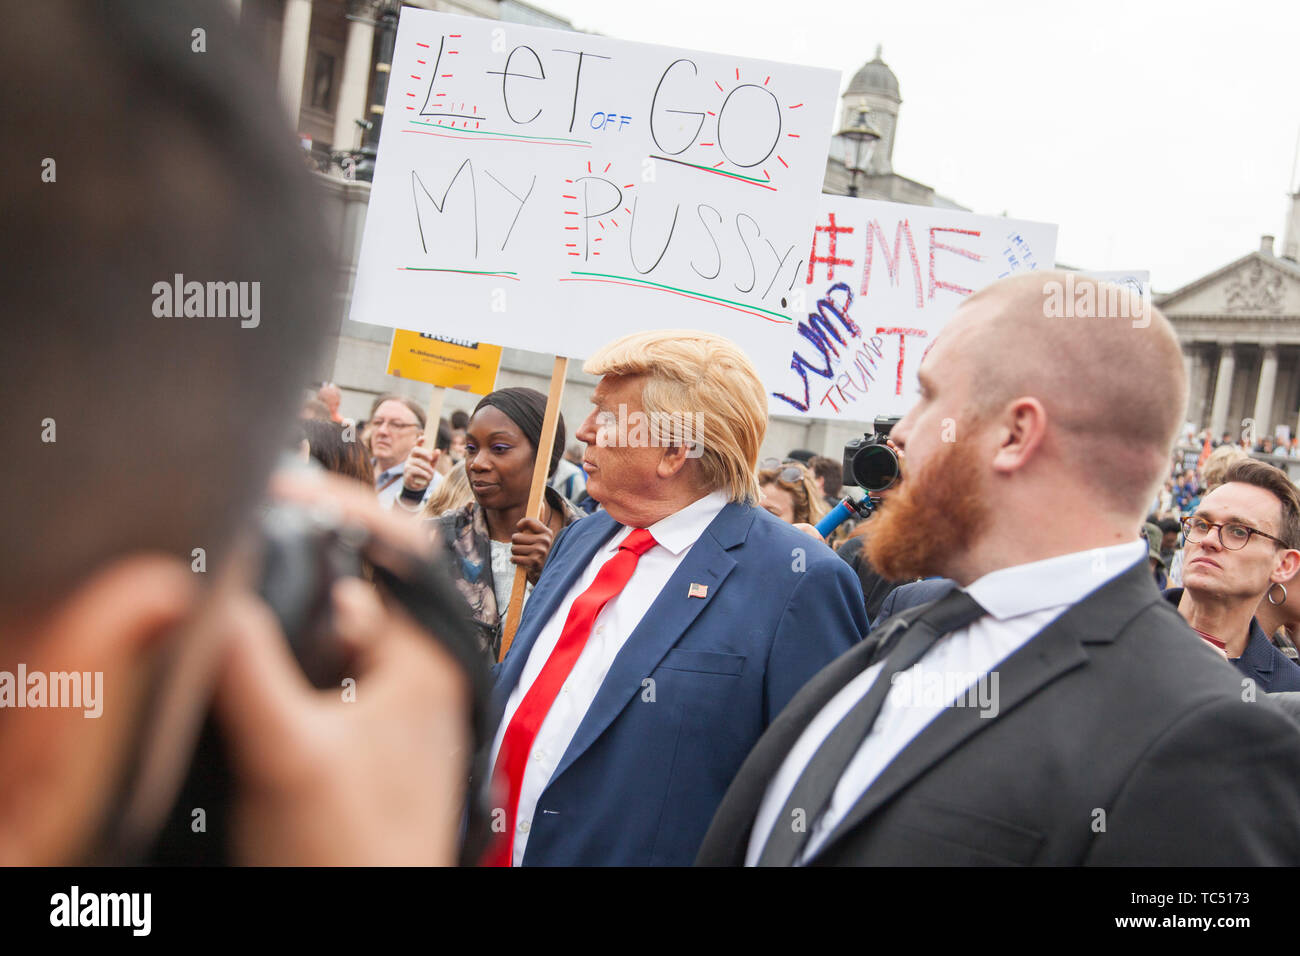 LONDON, UK - June 4th 2019: A Donald Trump lookalike in Trafalgar Square during a political protest Stock Photo